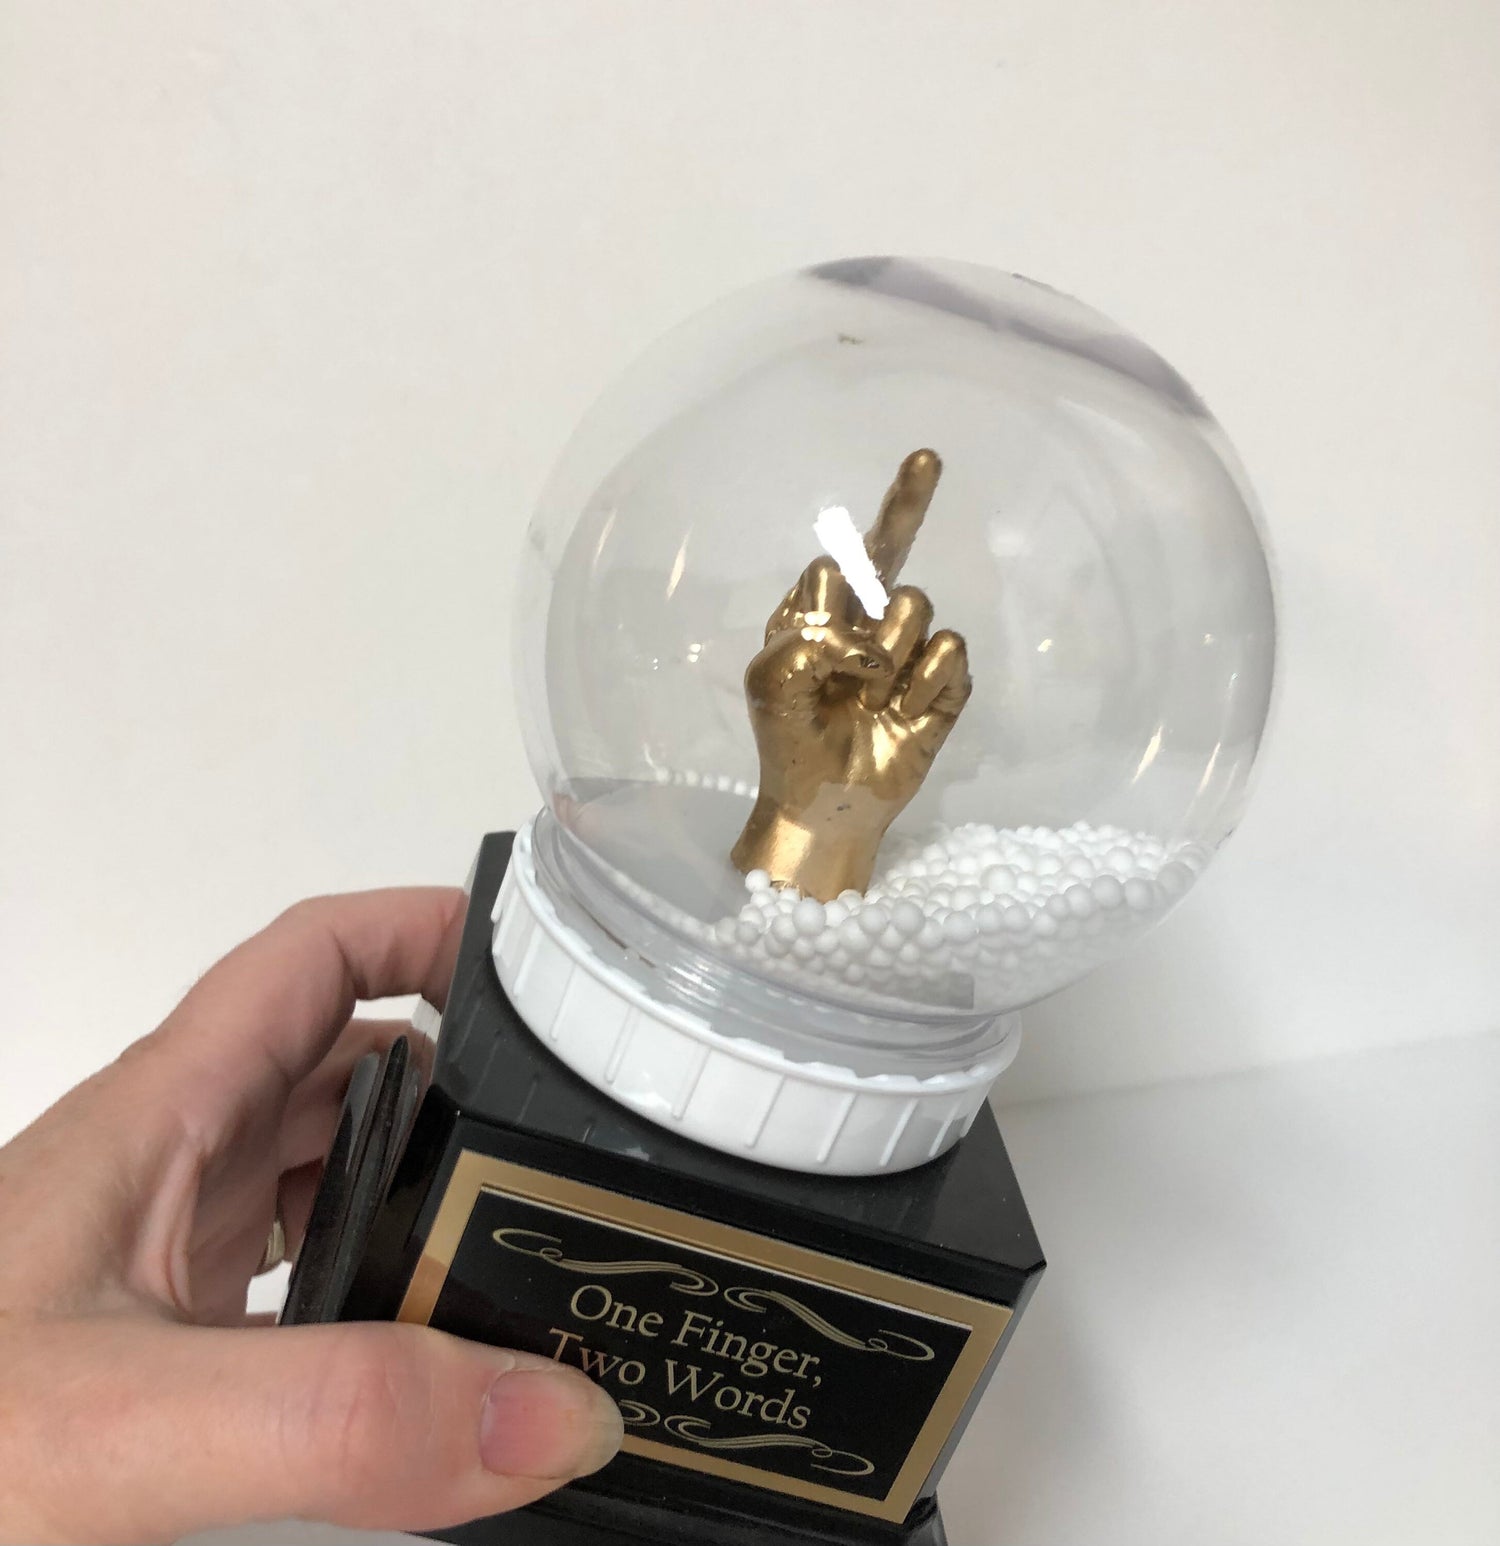 Middle Finger Funny Trophy Snow Globe FFL Loser Award Adult Humor The Bird F*ck You One Finger Two Words Christmas Gag Gift